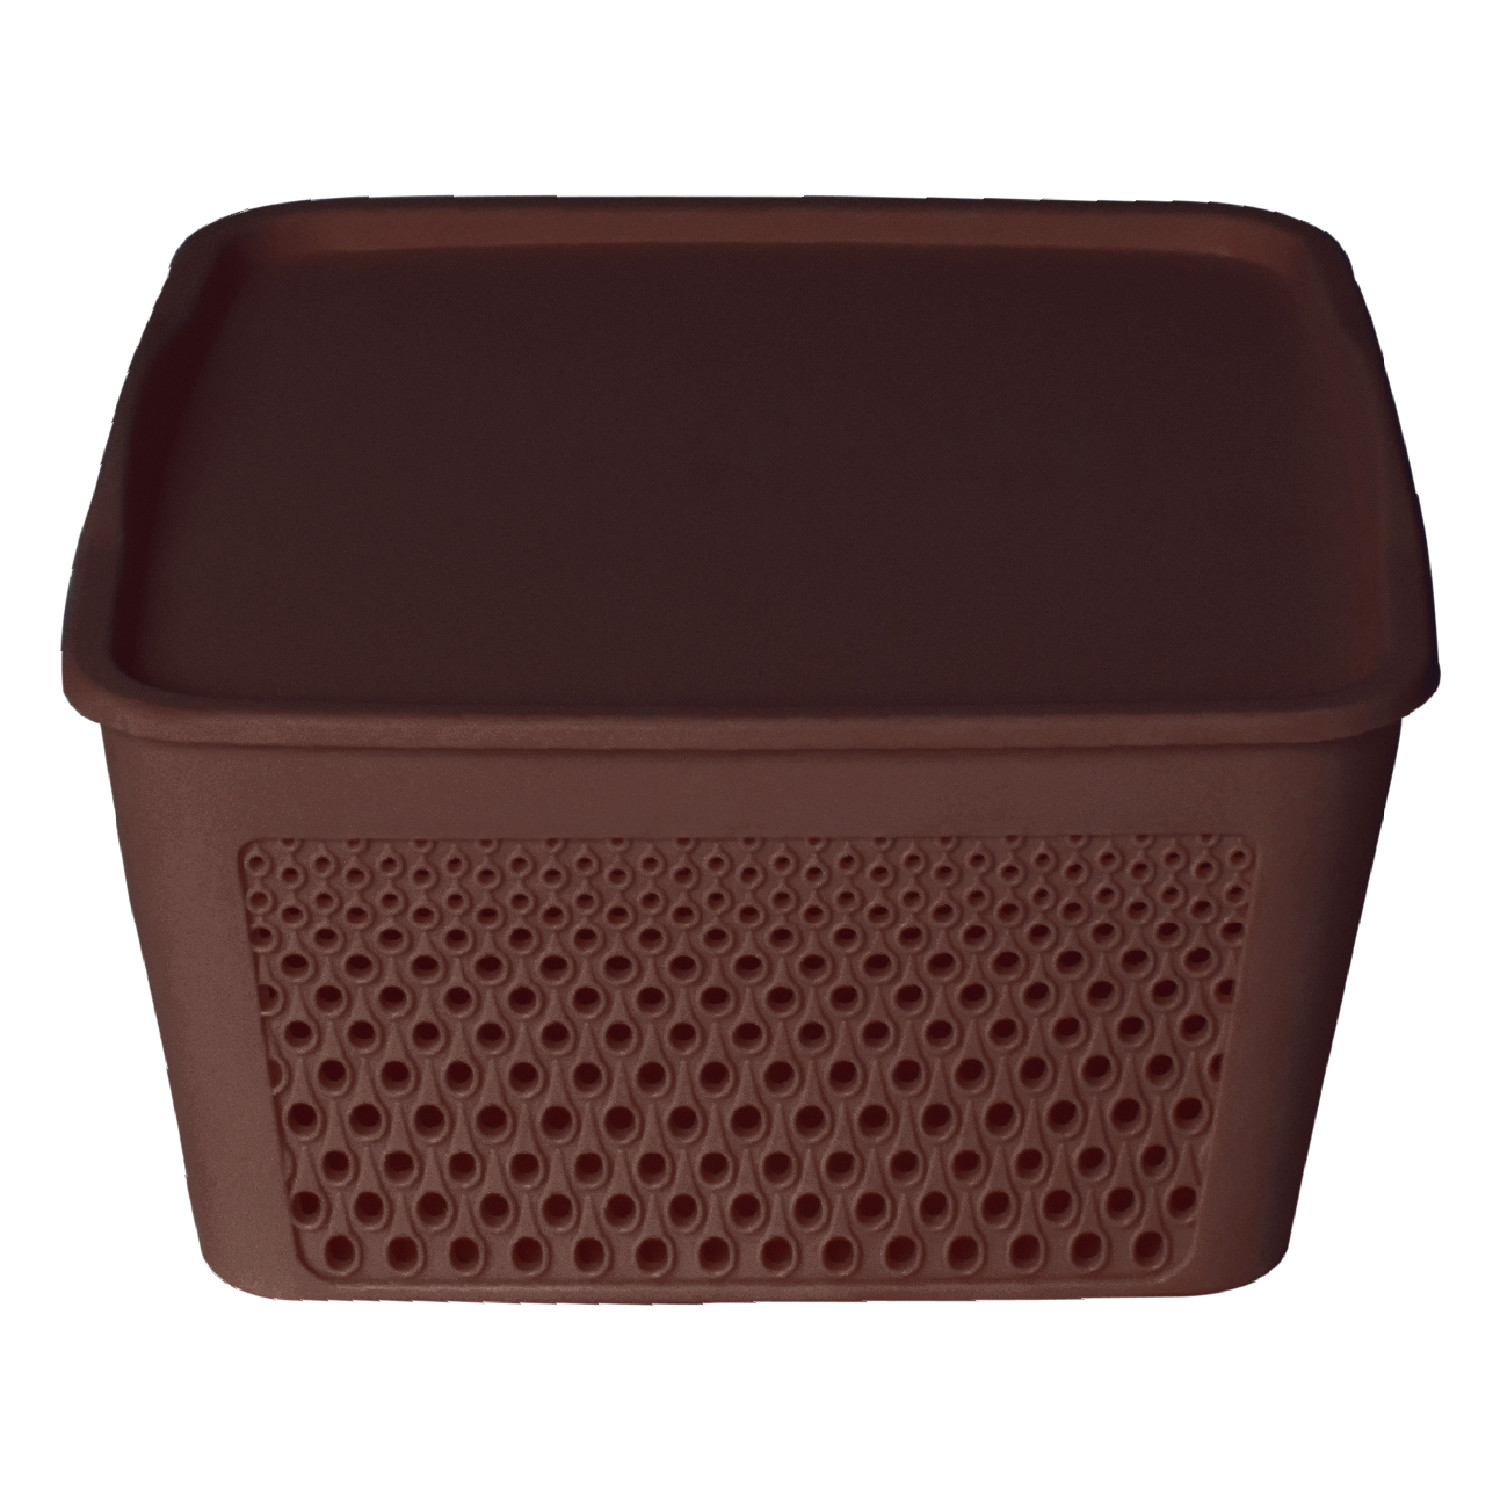 Kuber Industries Netted Design Unbreakable Multipurpose Square Shape Plastic Storage Baskets with lid Small, Medium, Large Pack of 3 (Brown)